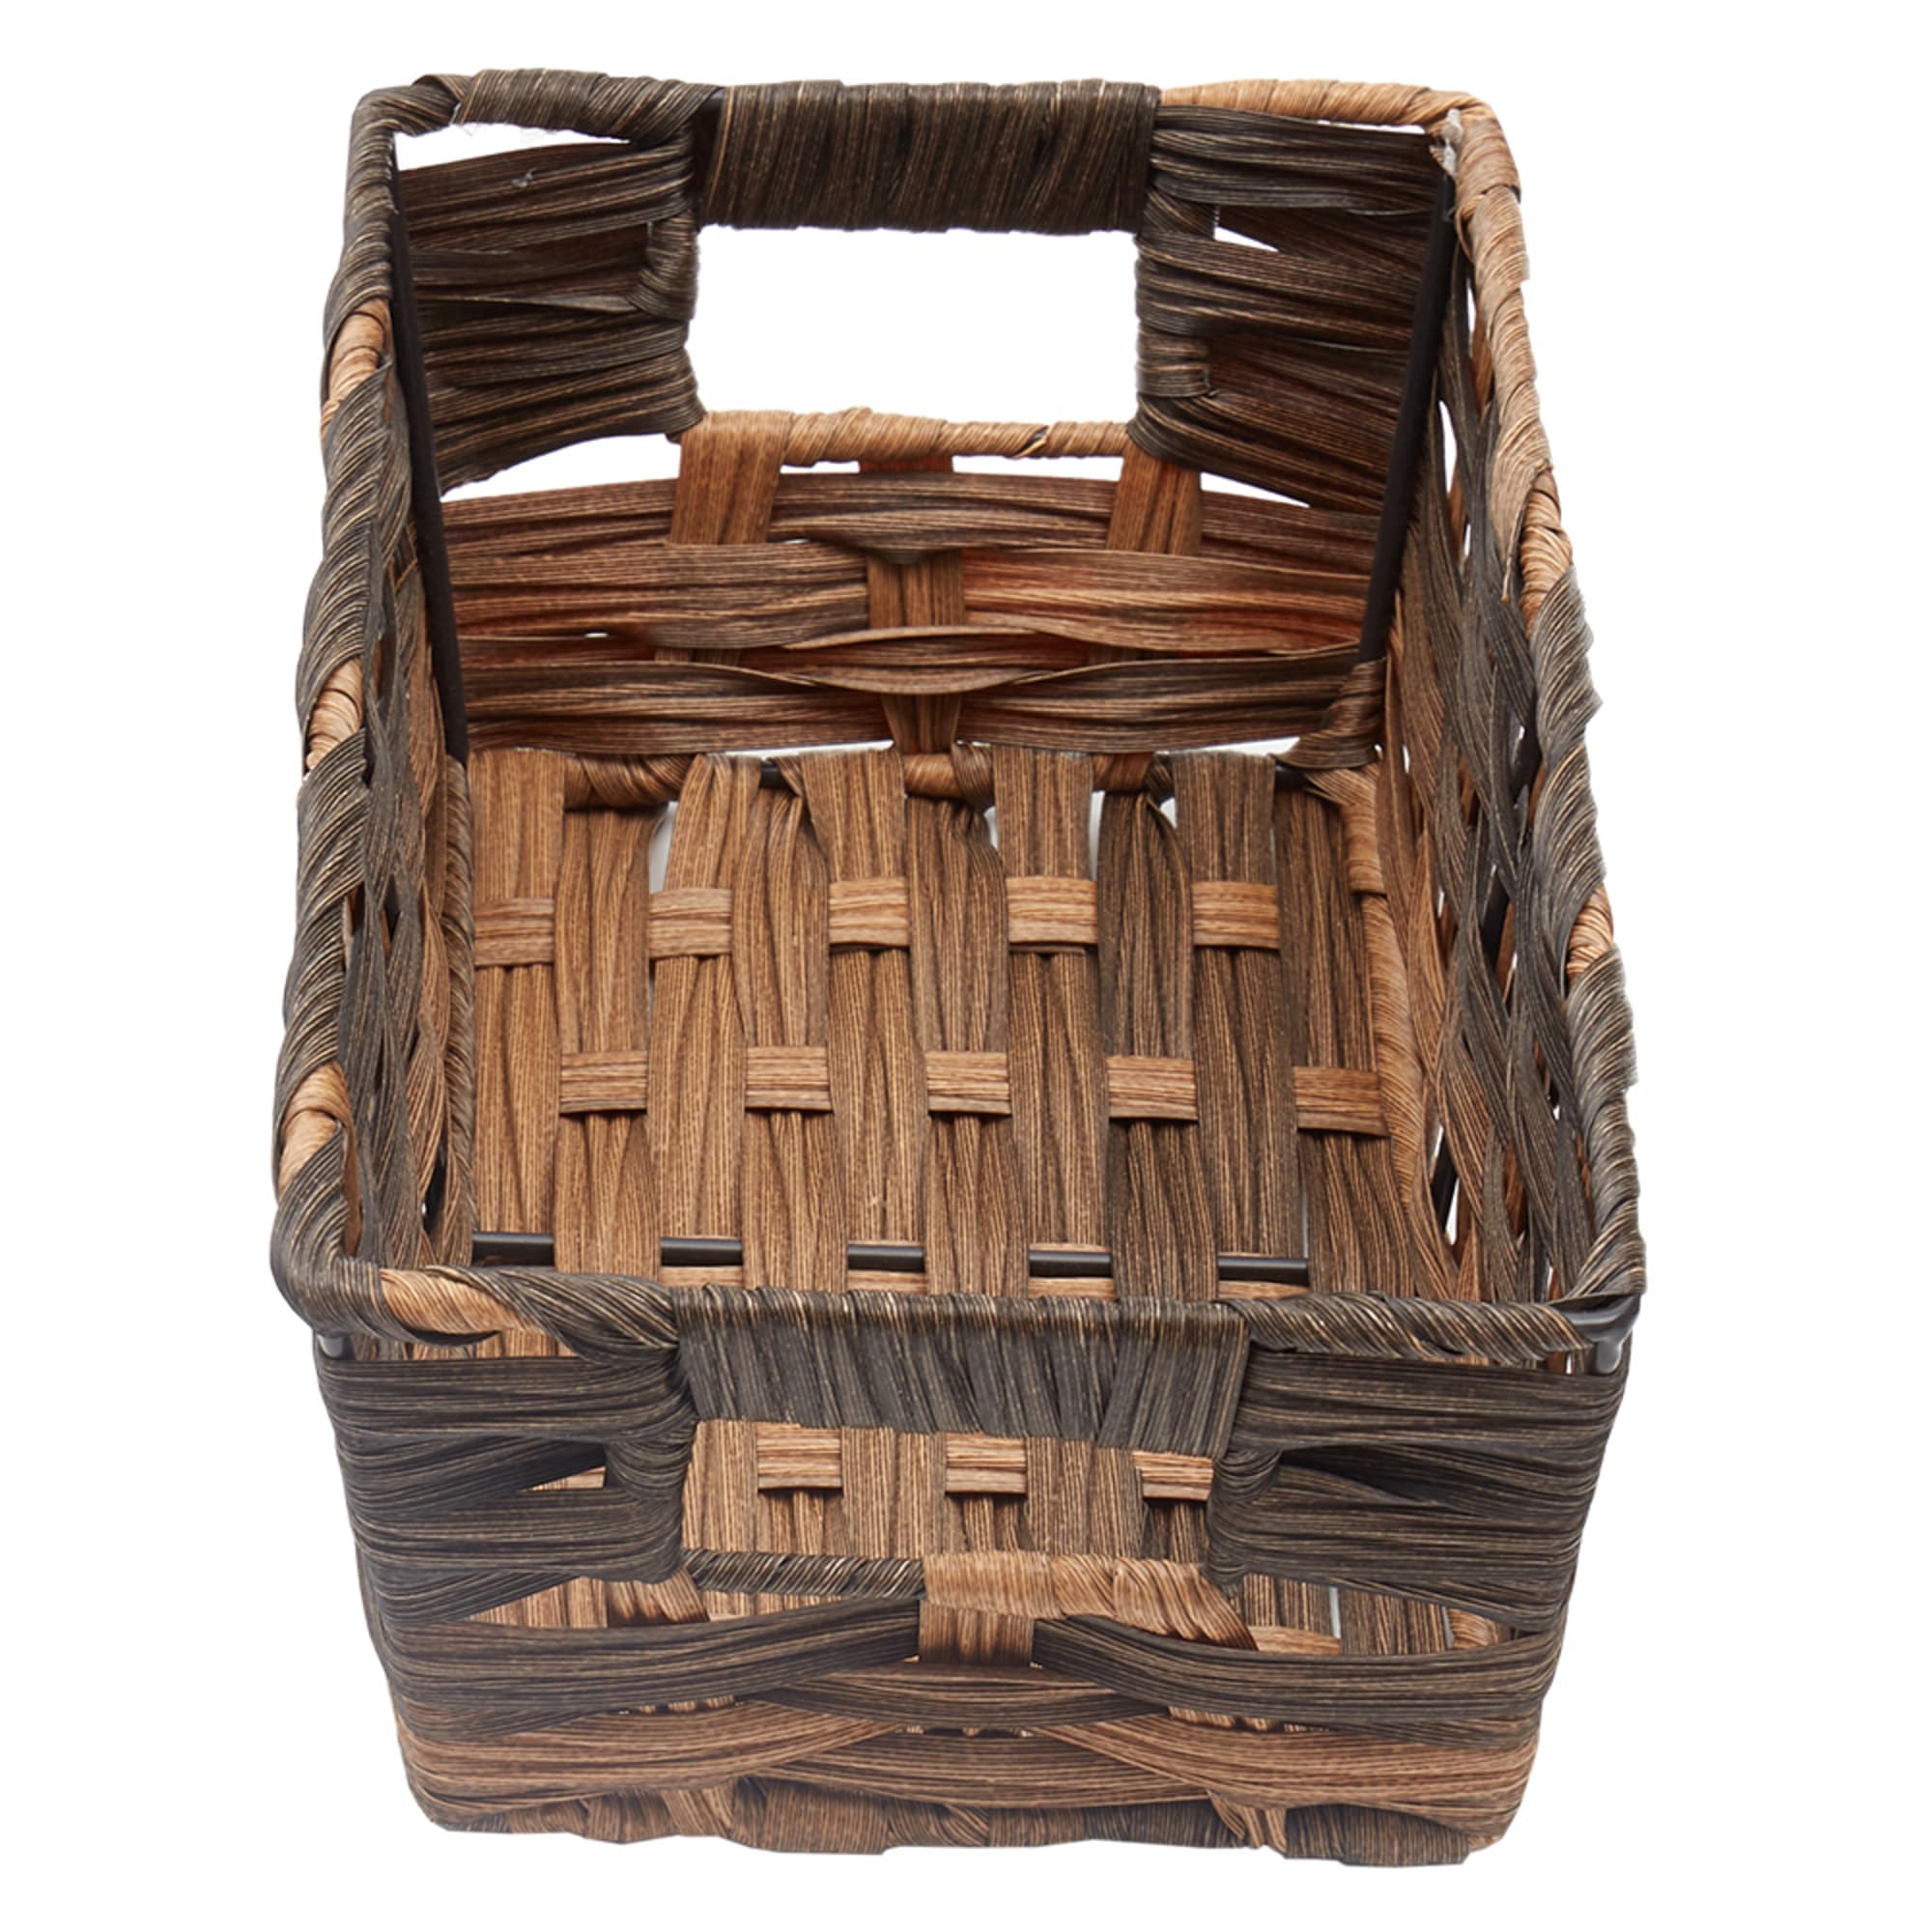 Home Basics Small Faux Rattan Basket with Cut-out Handles, Coffee $6.50 EACH, CASE PACK OF 6